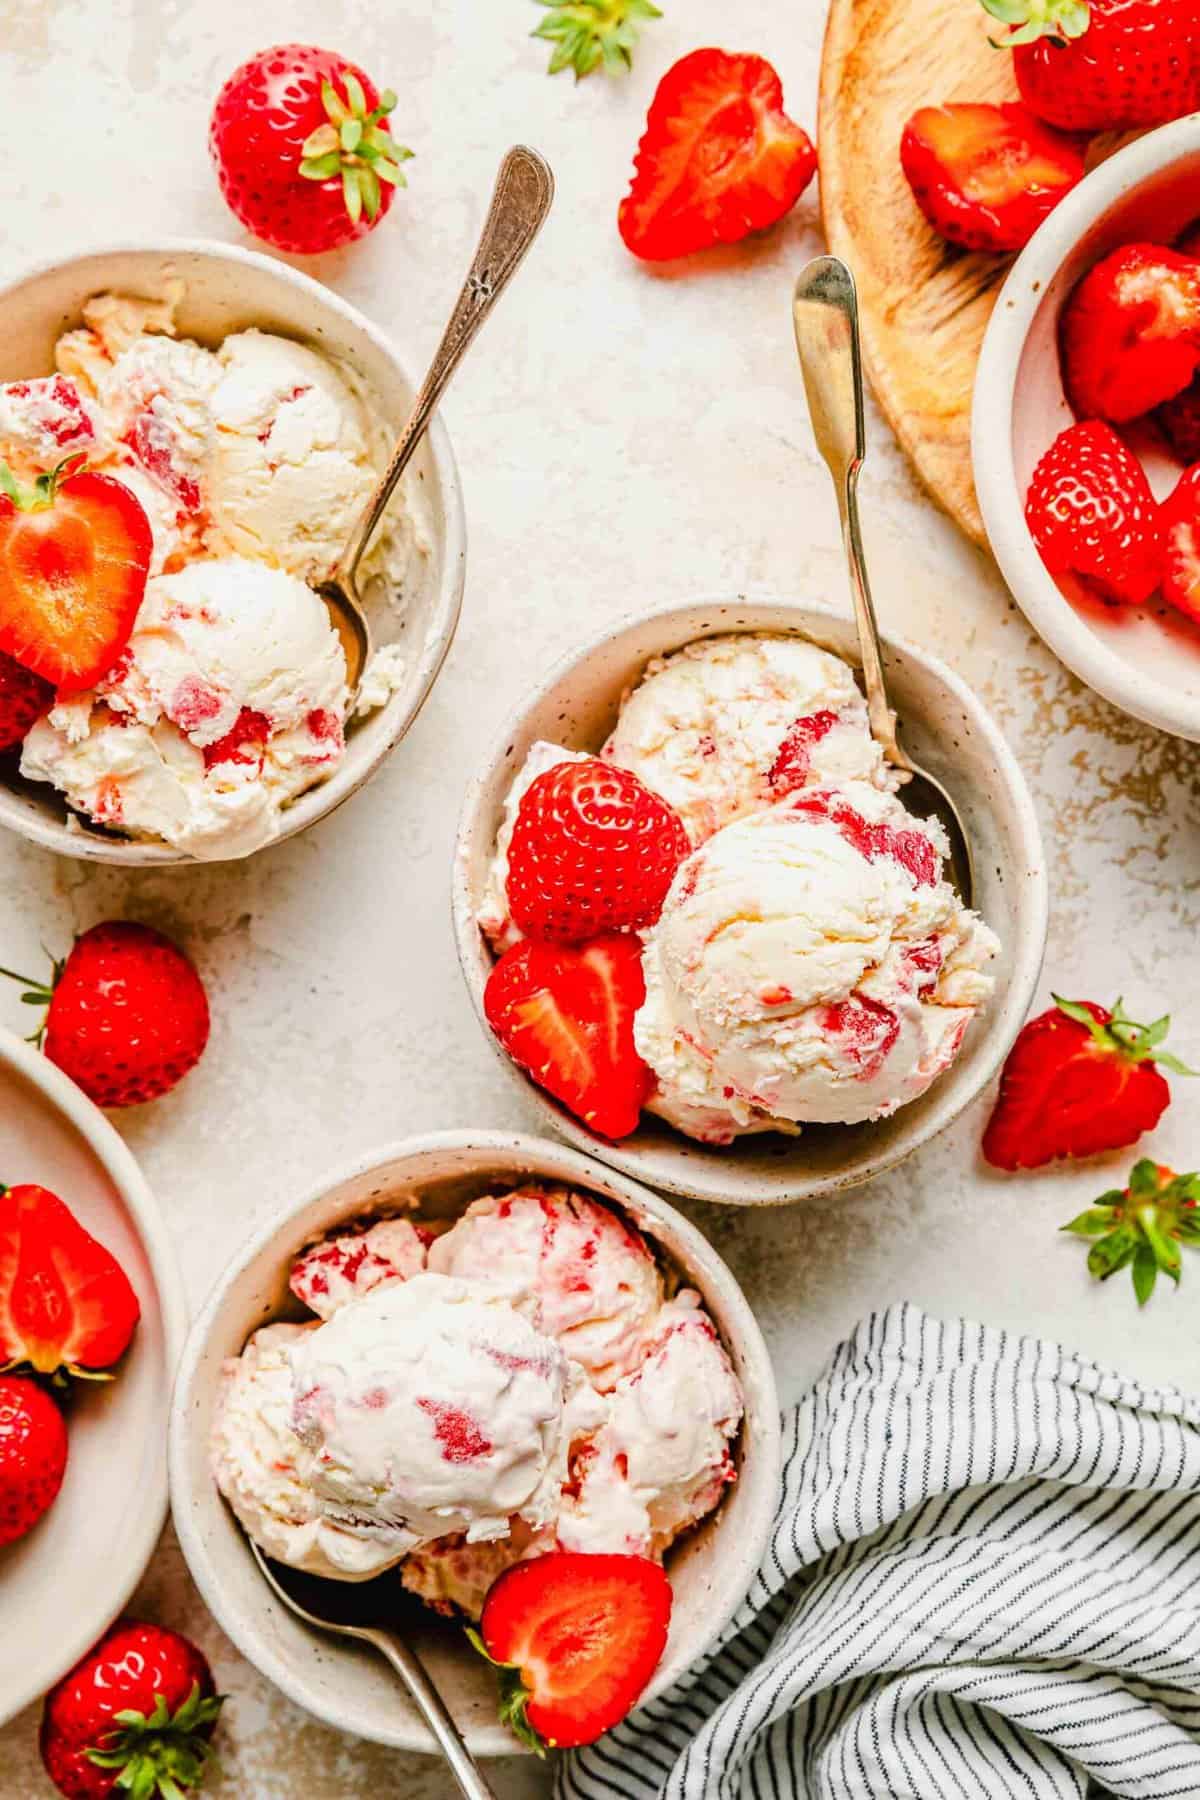 Overhead of strawberry ice cream served in bowls with spoons and garnished with fresh strawberries.